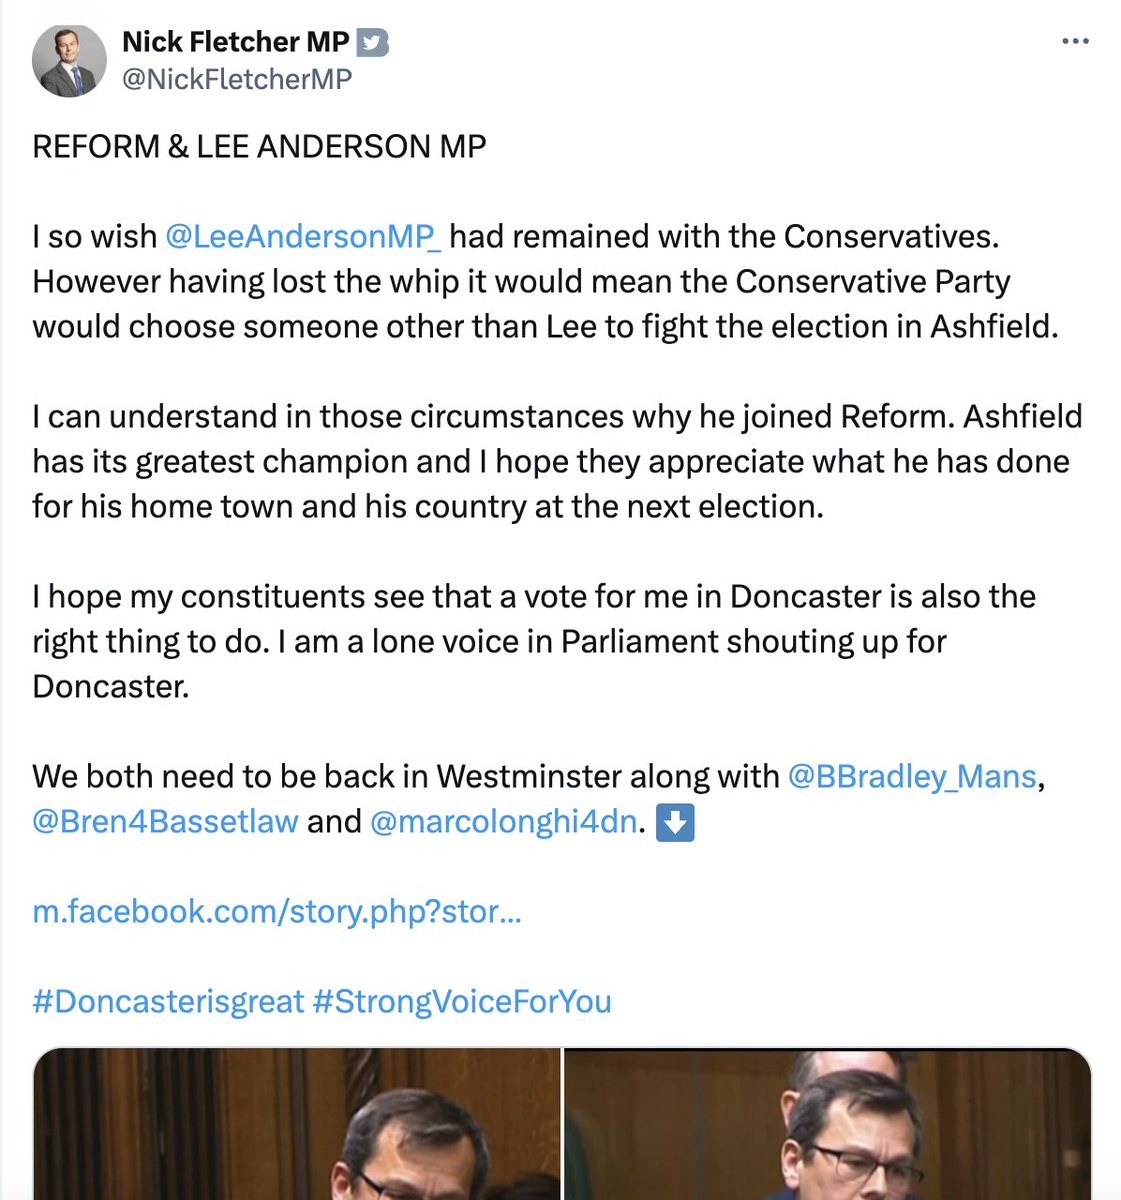 Just a Conservative MP actively encouraging voters to back a candidate from a rival political party